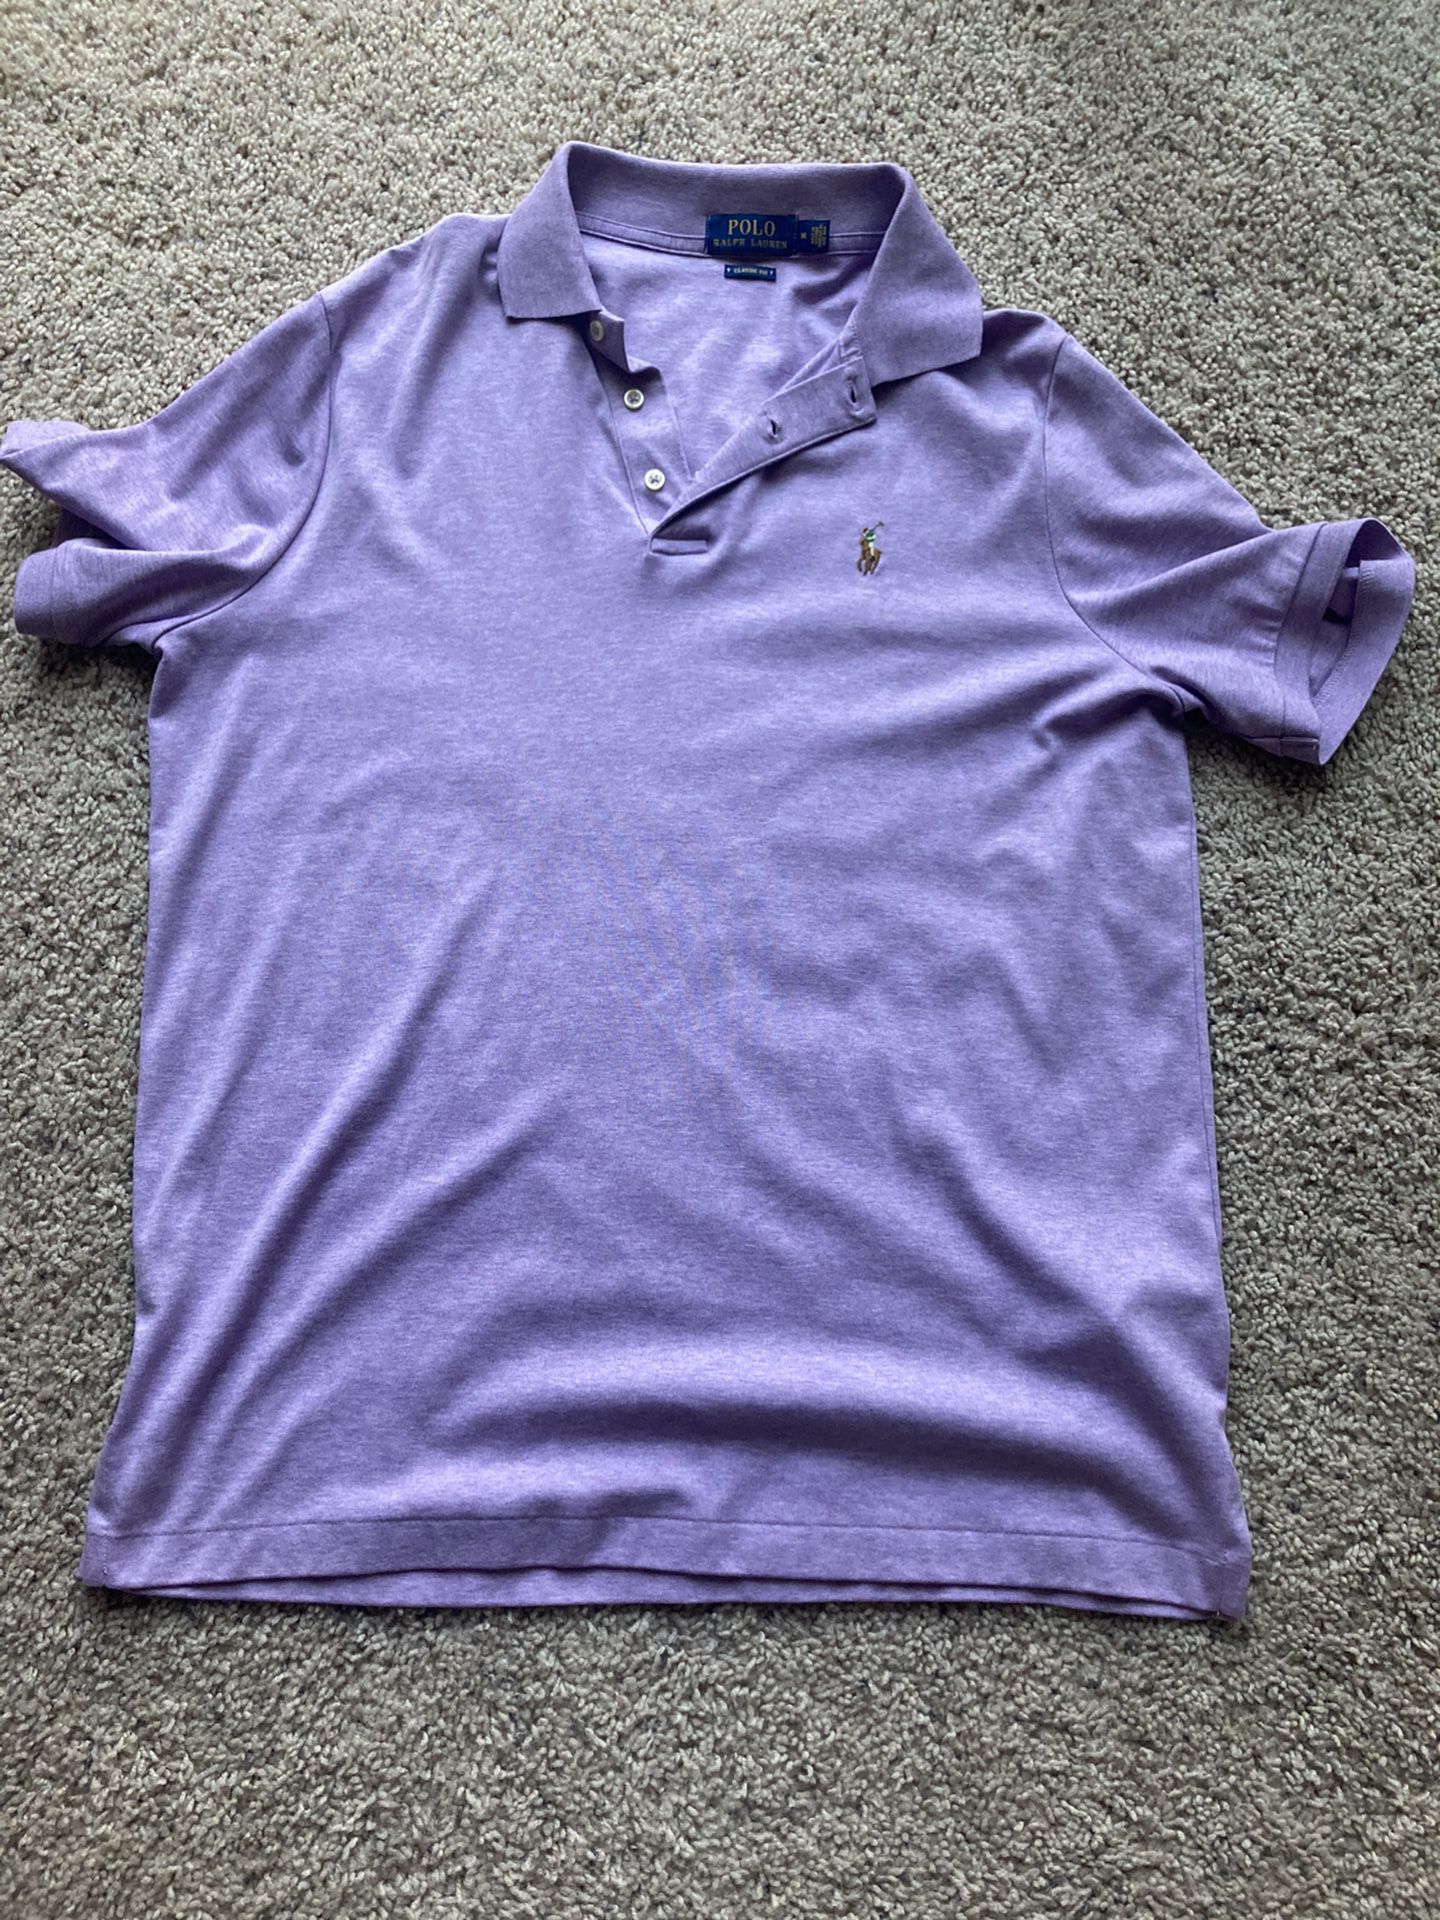 Ralph Lauren Polo Shirt USED Purple Chaps Tommy Nautica Lacoste for Sale in Tulare, CA - OfferUp